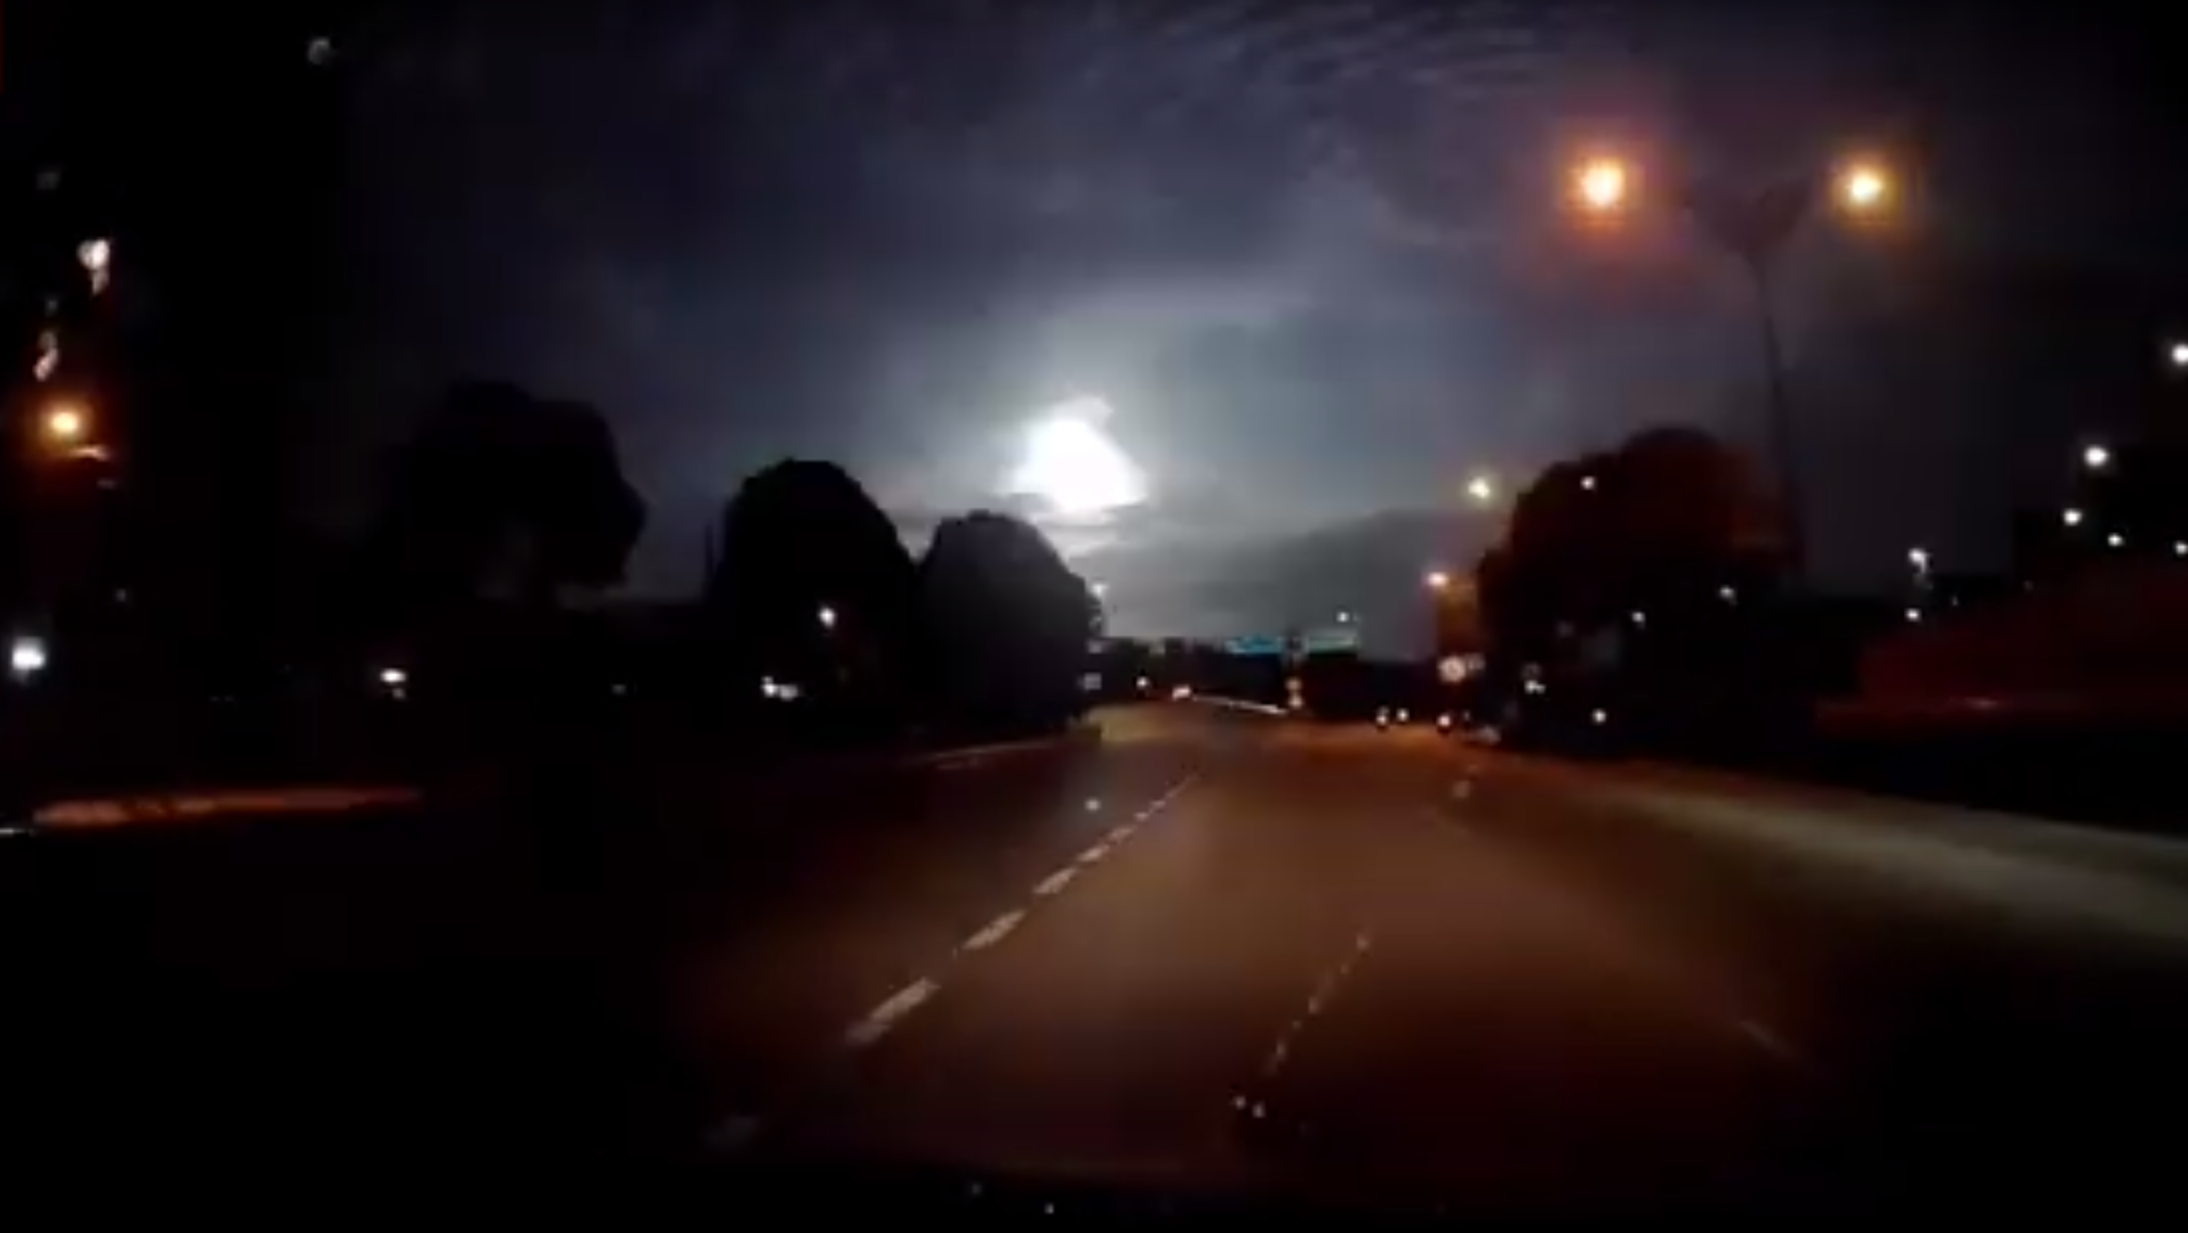 A fireball lights up the sky in Johor Bahru, Malaysia (Source: Unknown/Reddit)